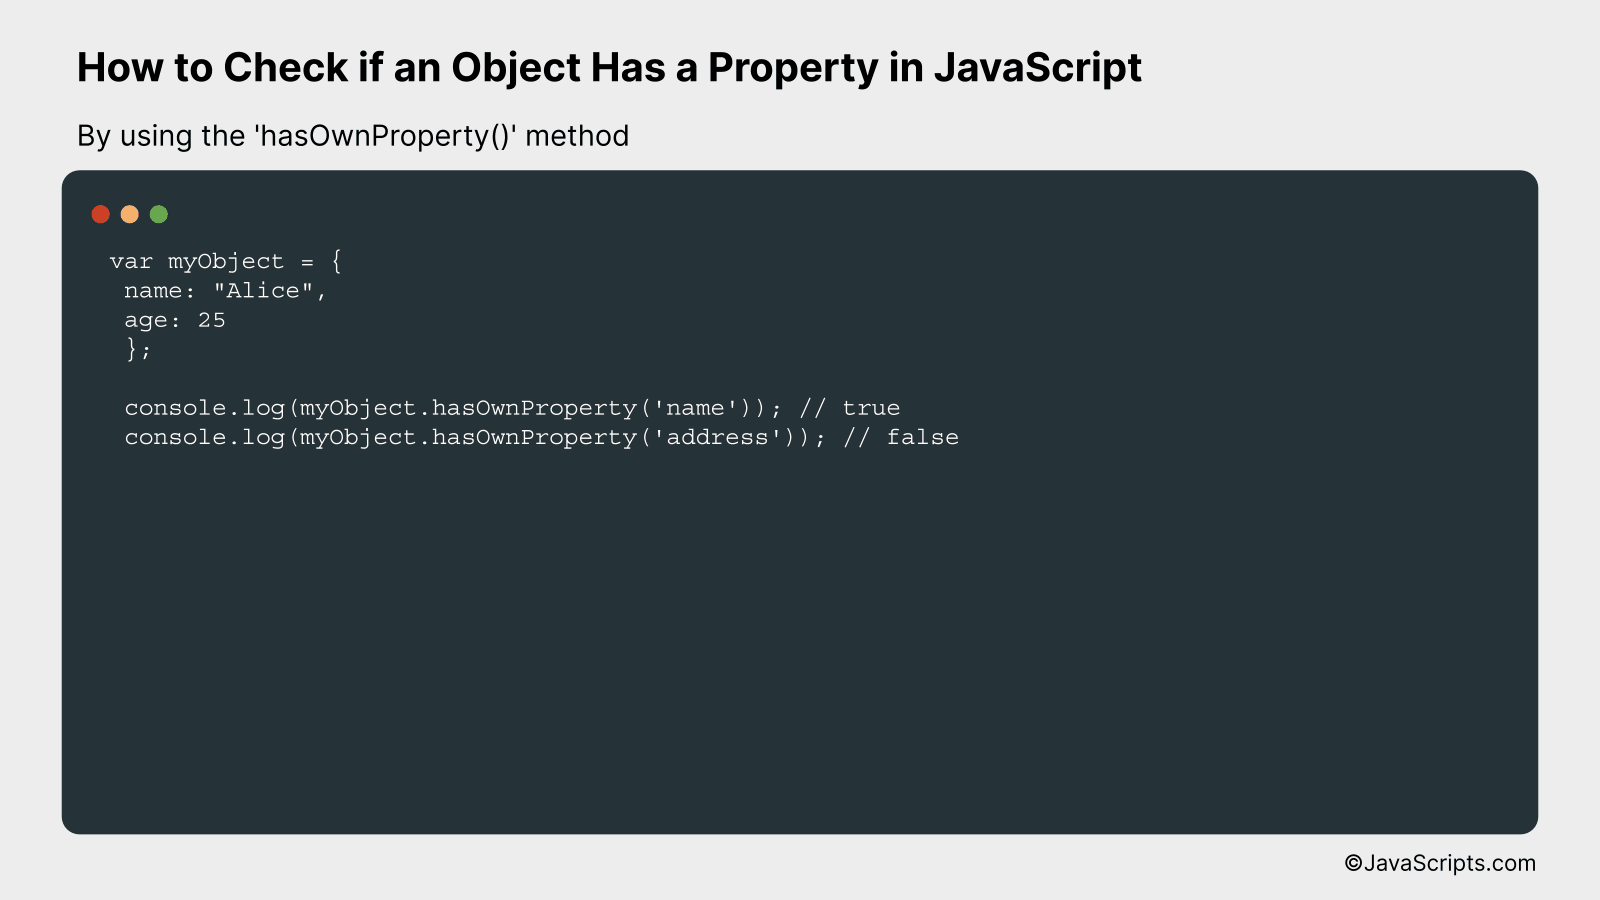 By using the 'hasOwnProperty()' method